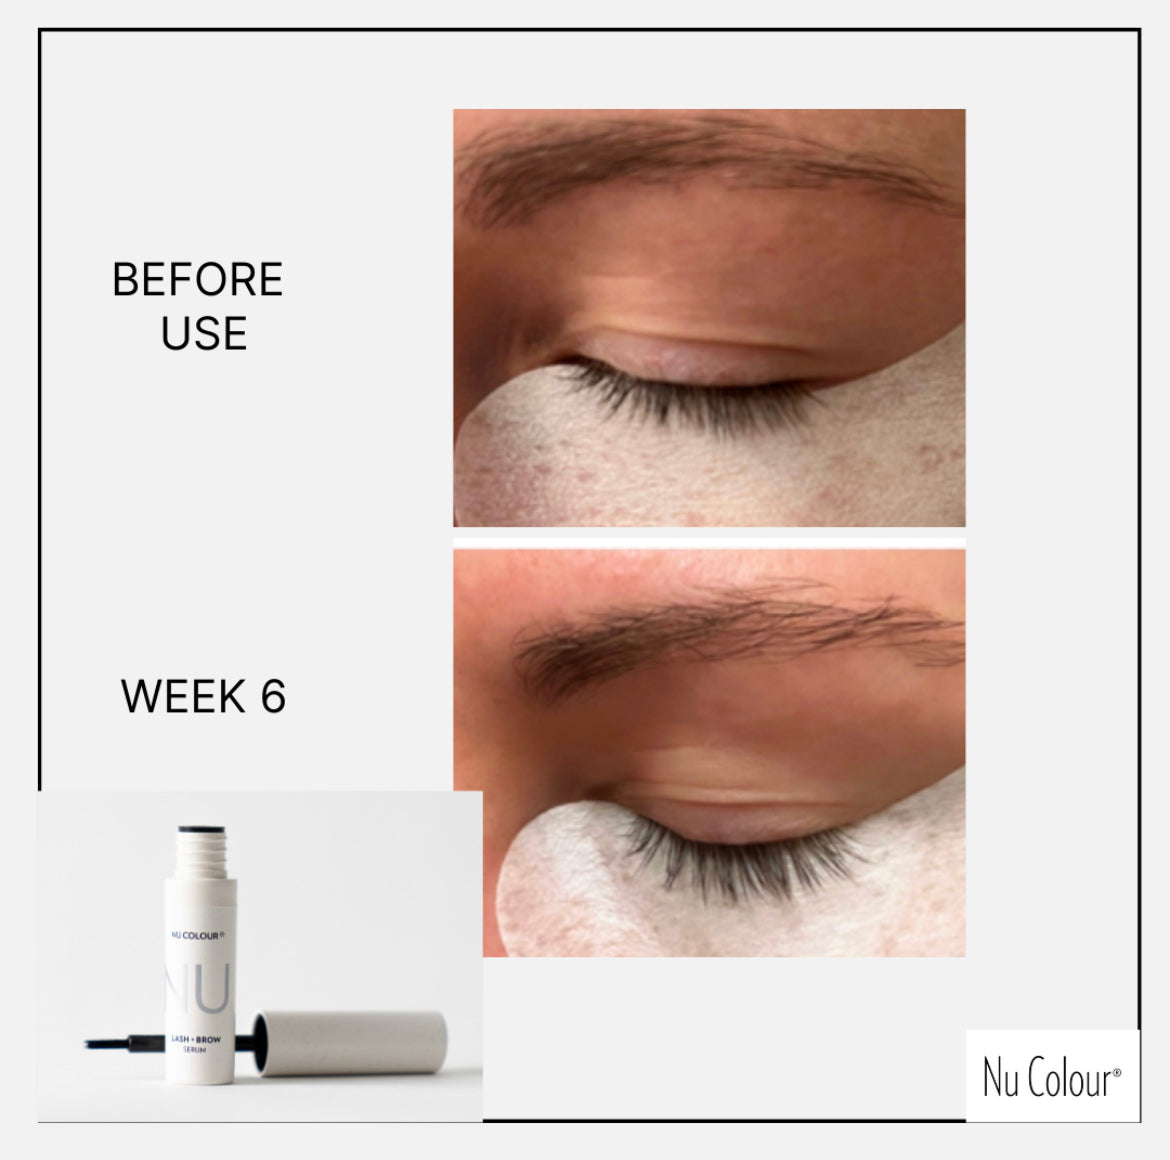 Nu Colour Lash and Brow Serum - GET A FREE MASCARA with purchase